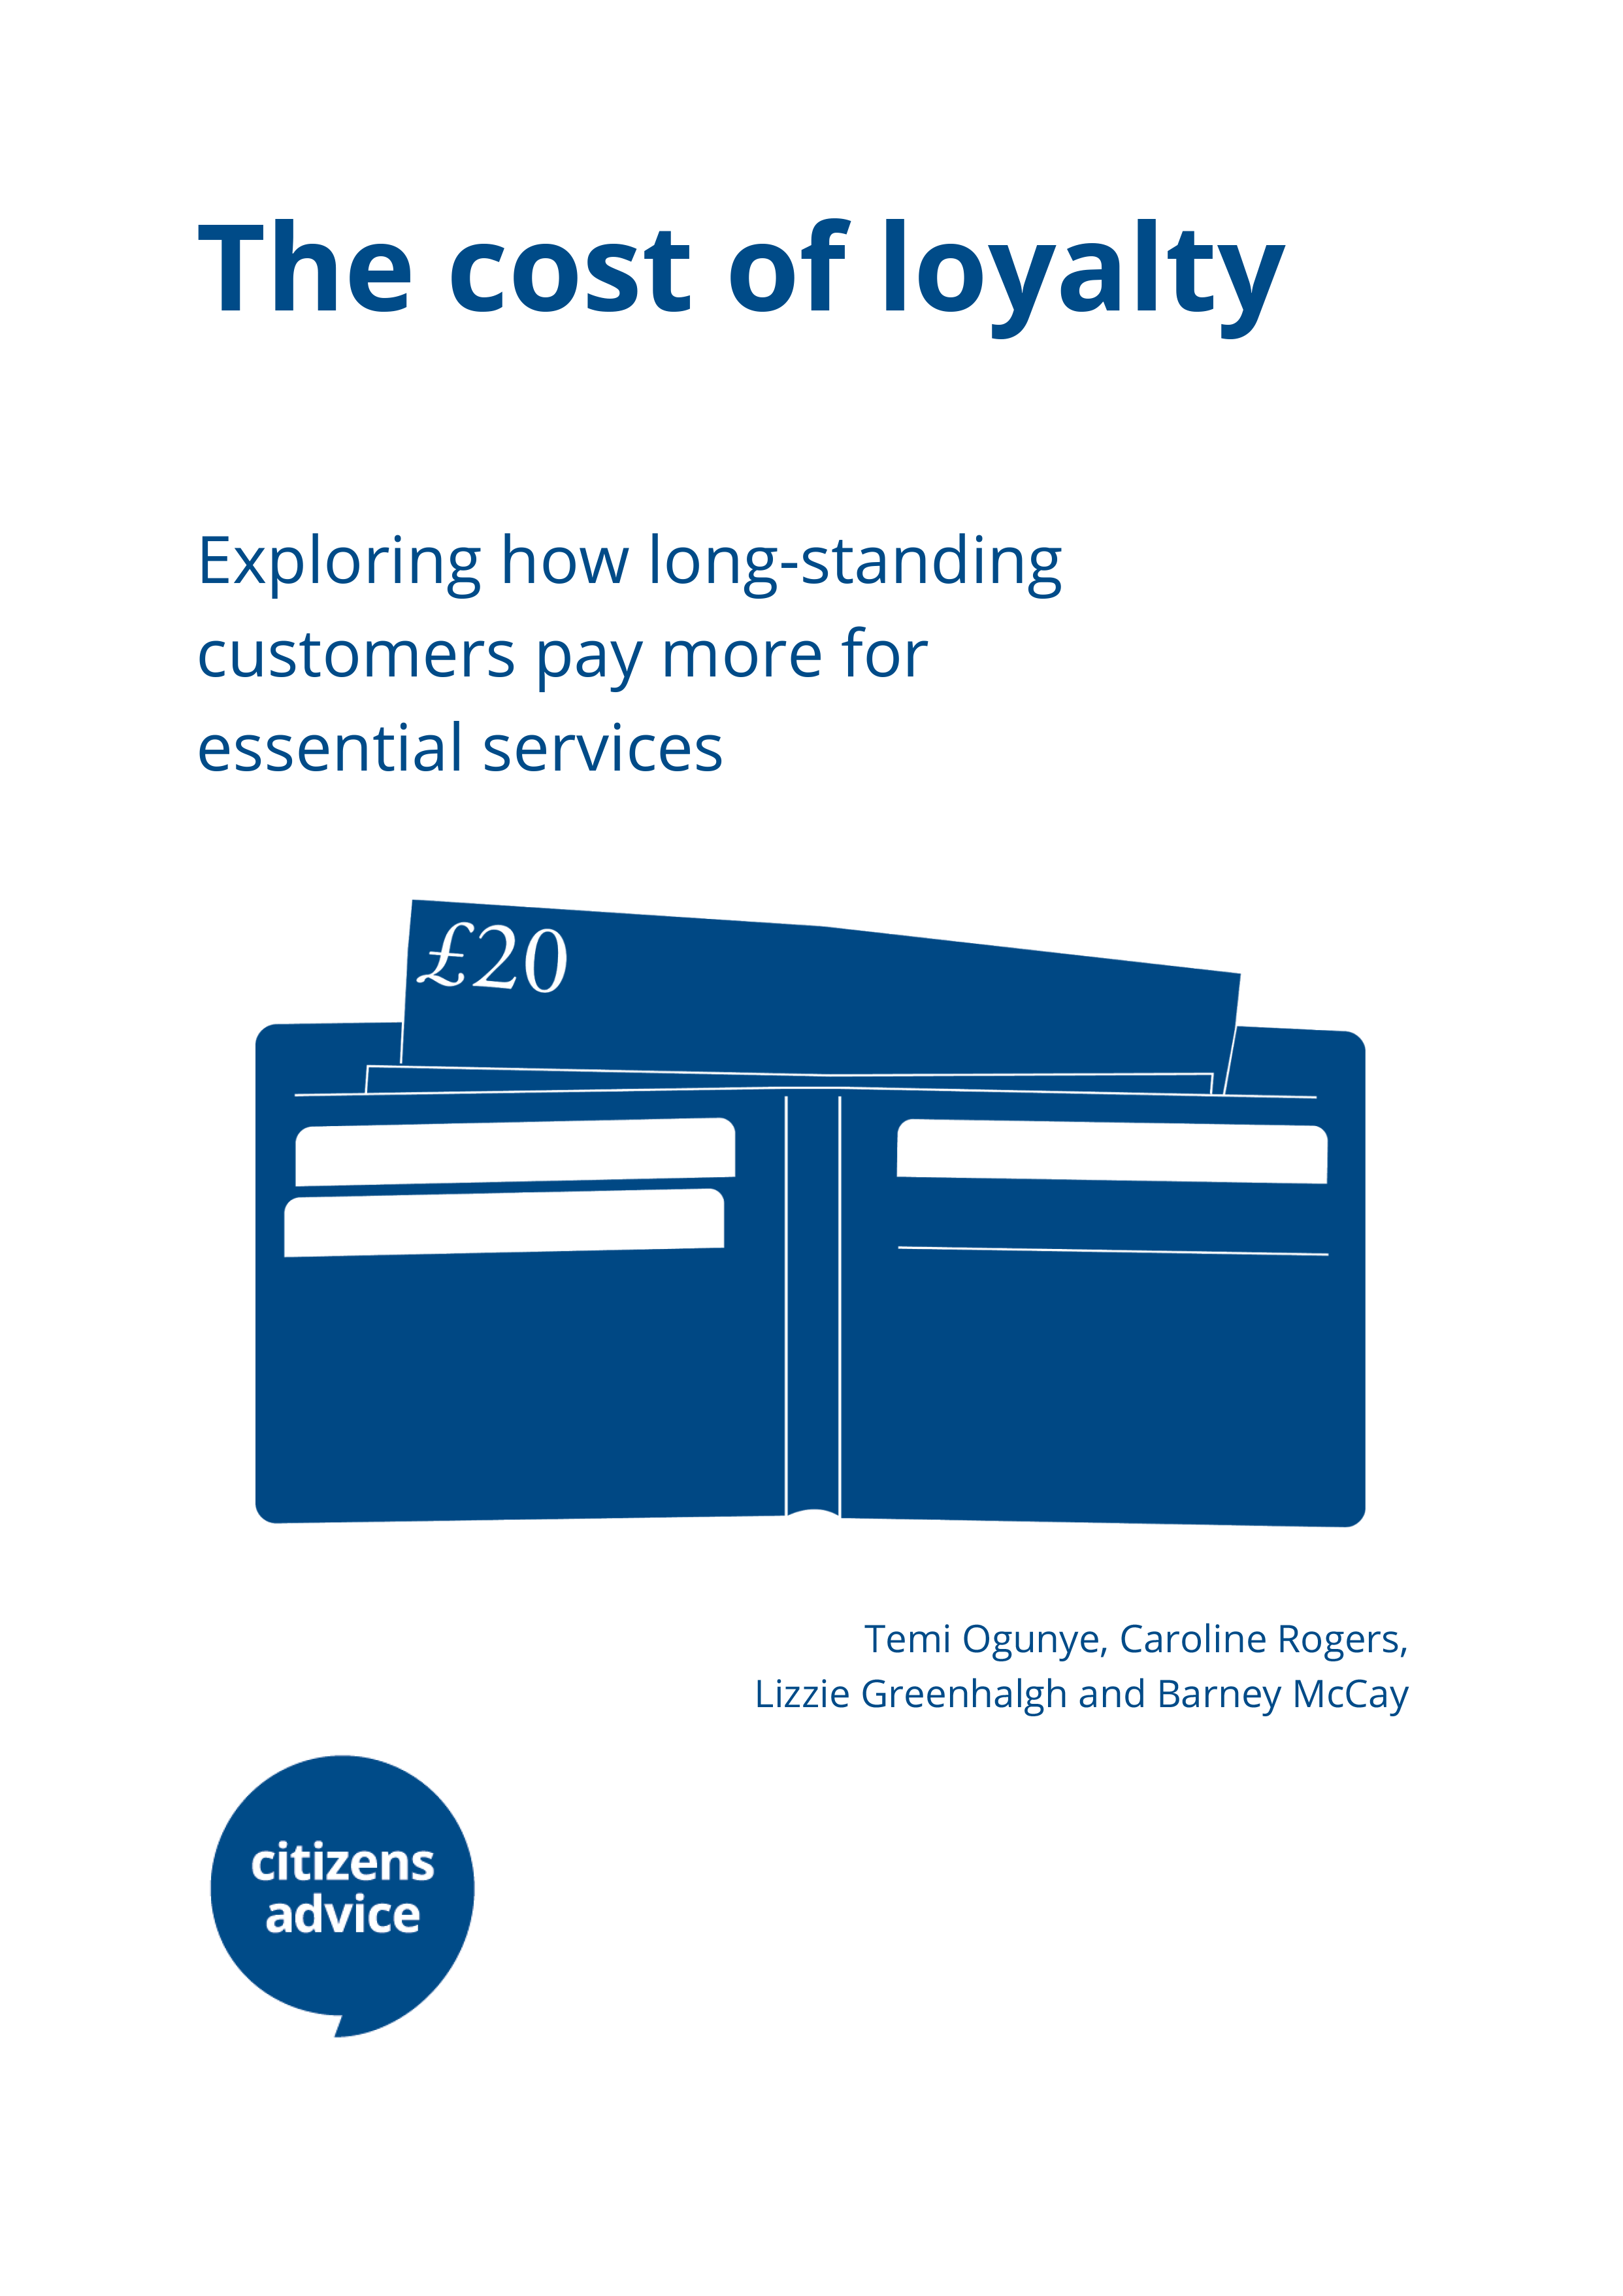 The cost of loyalty report cover